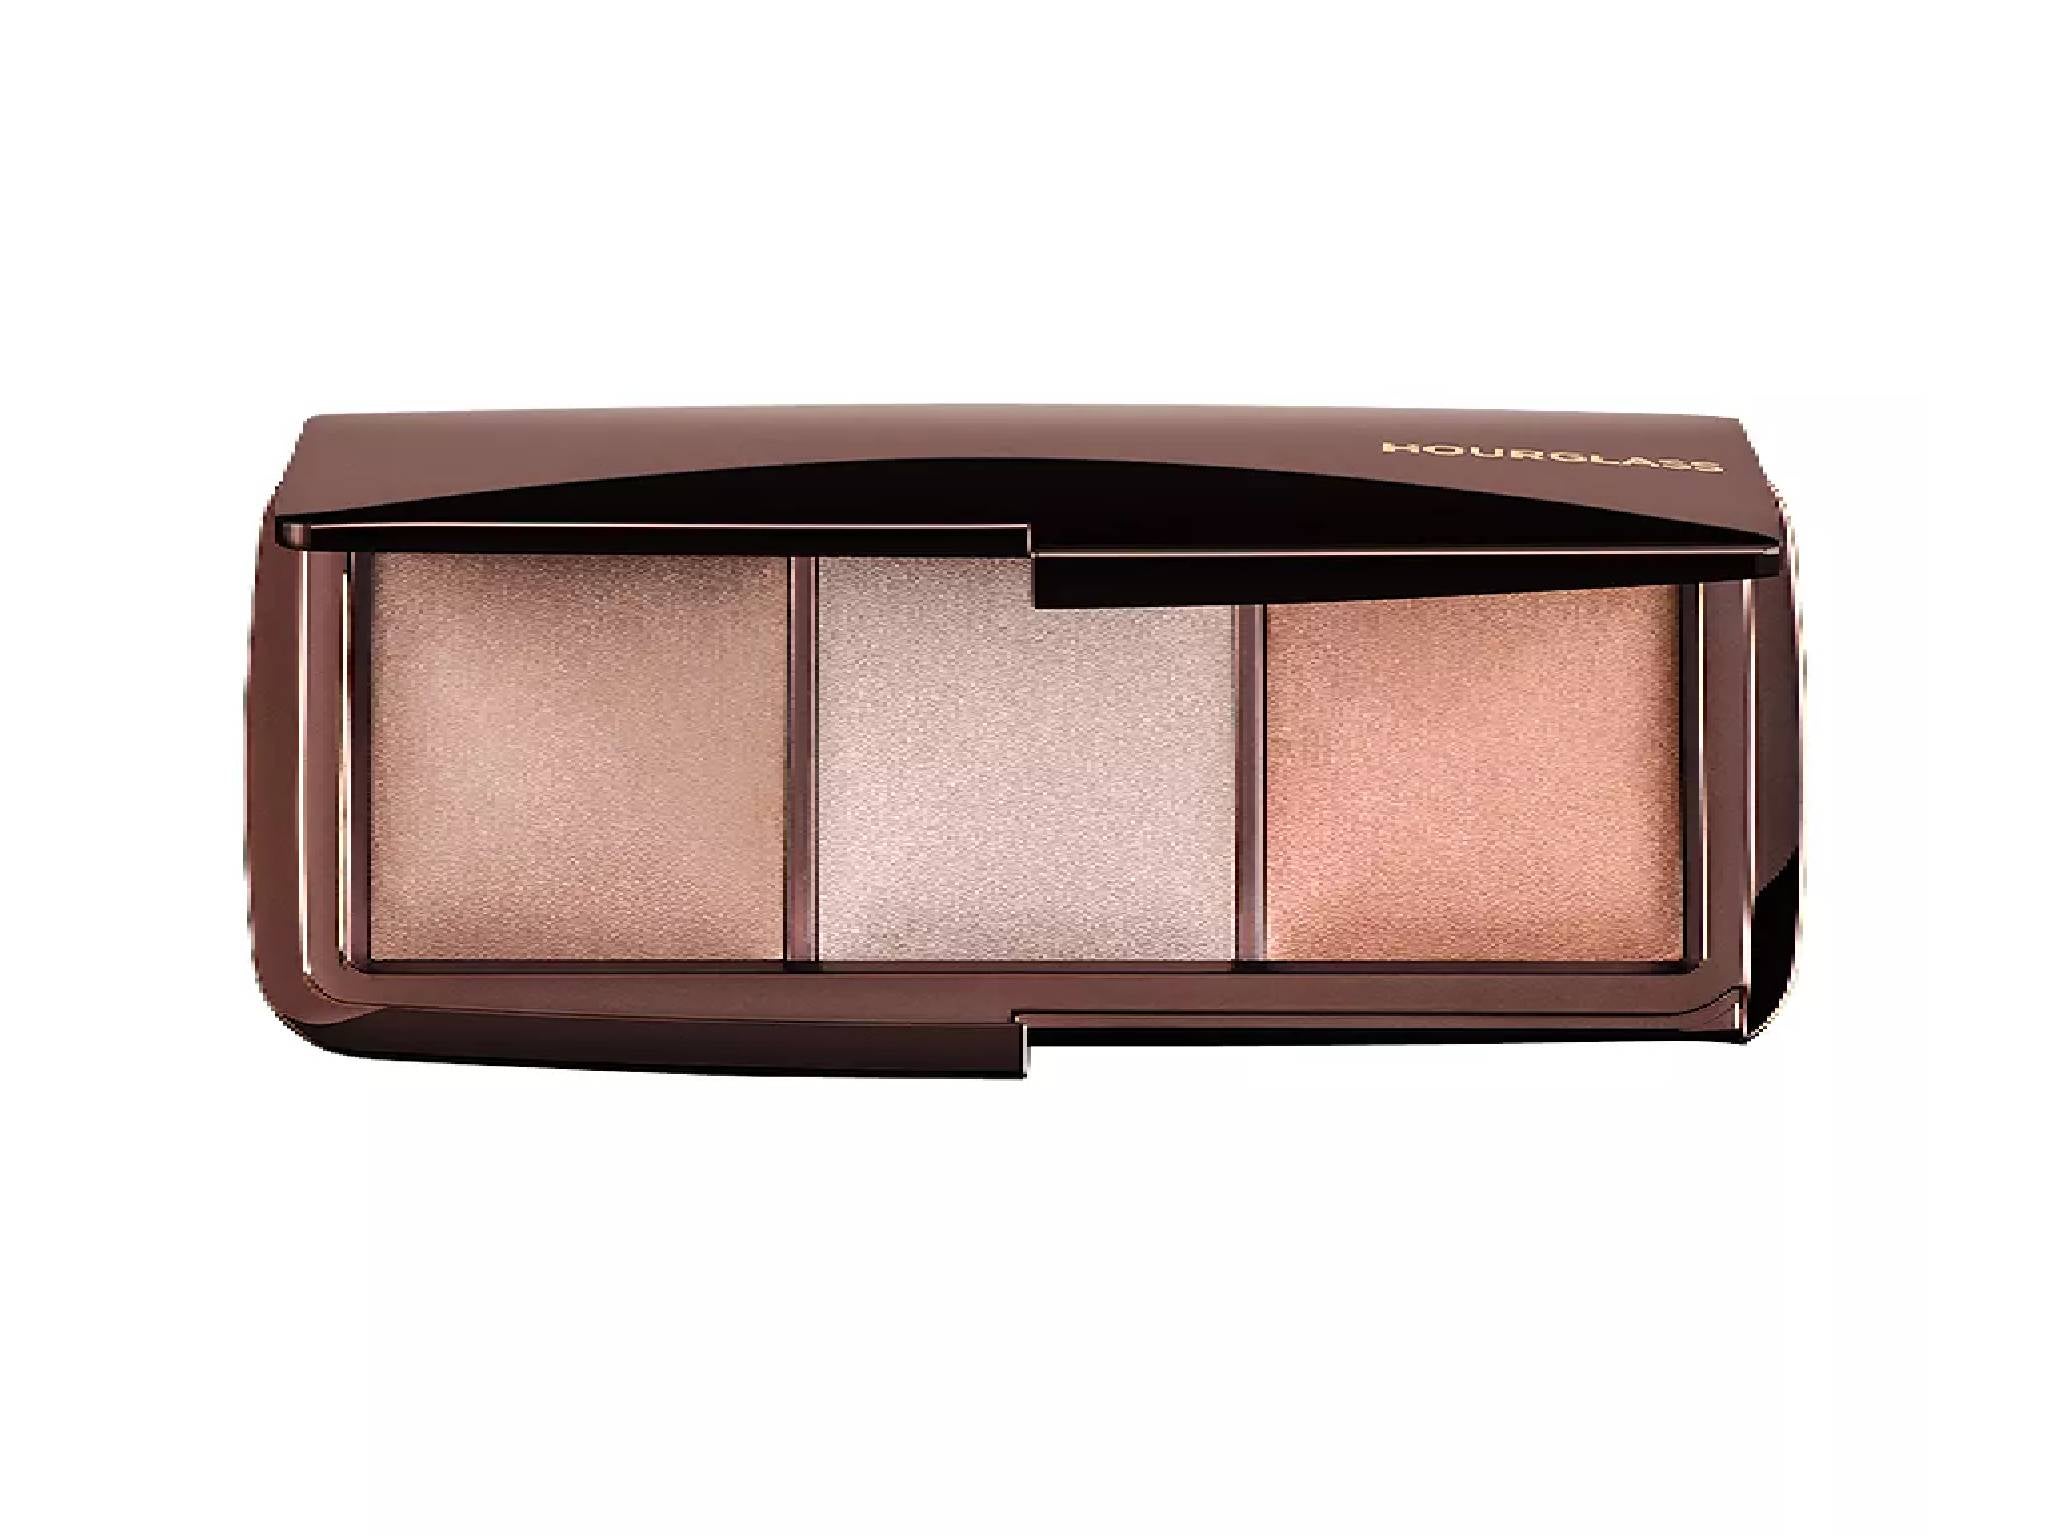  Hourglass ambient lighting palette